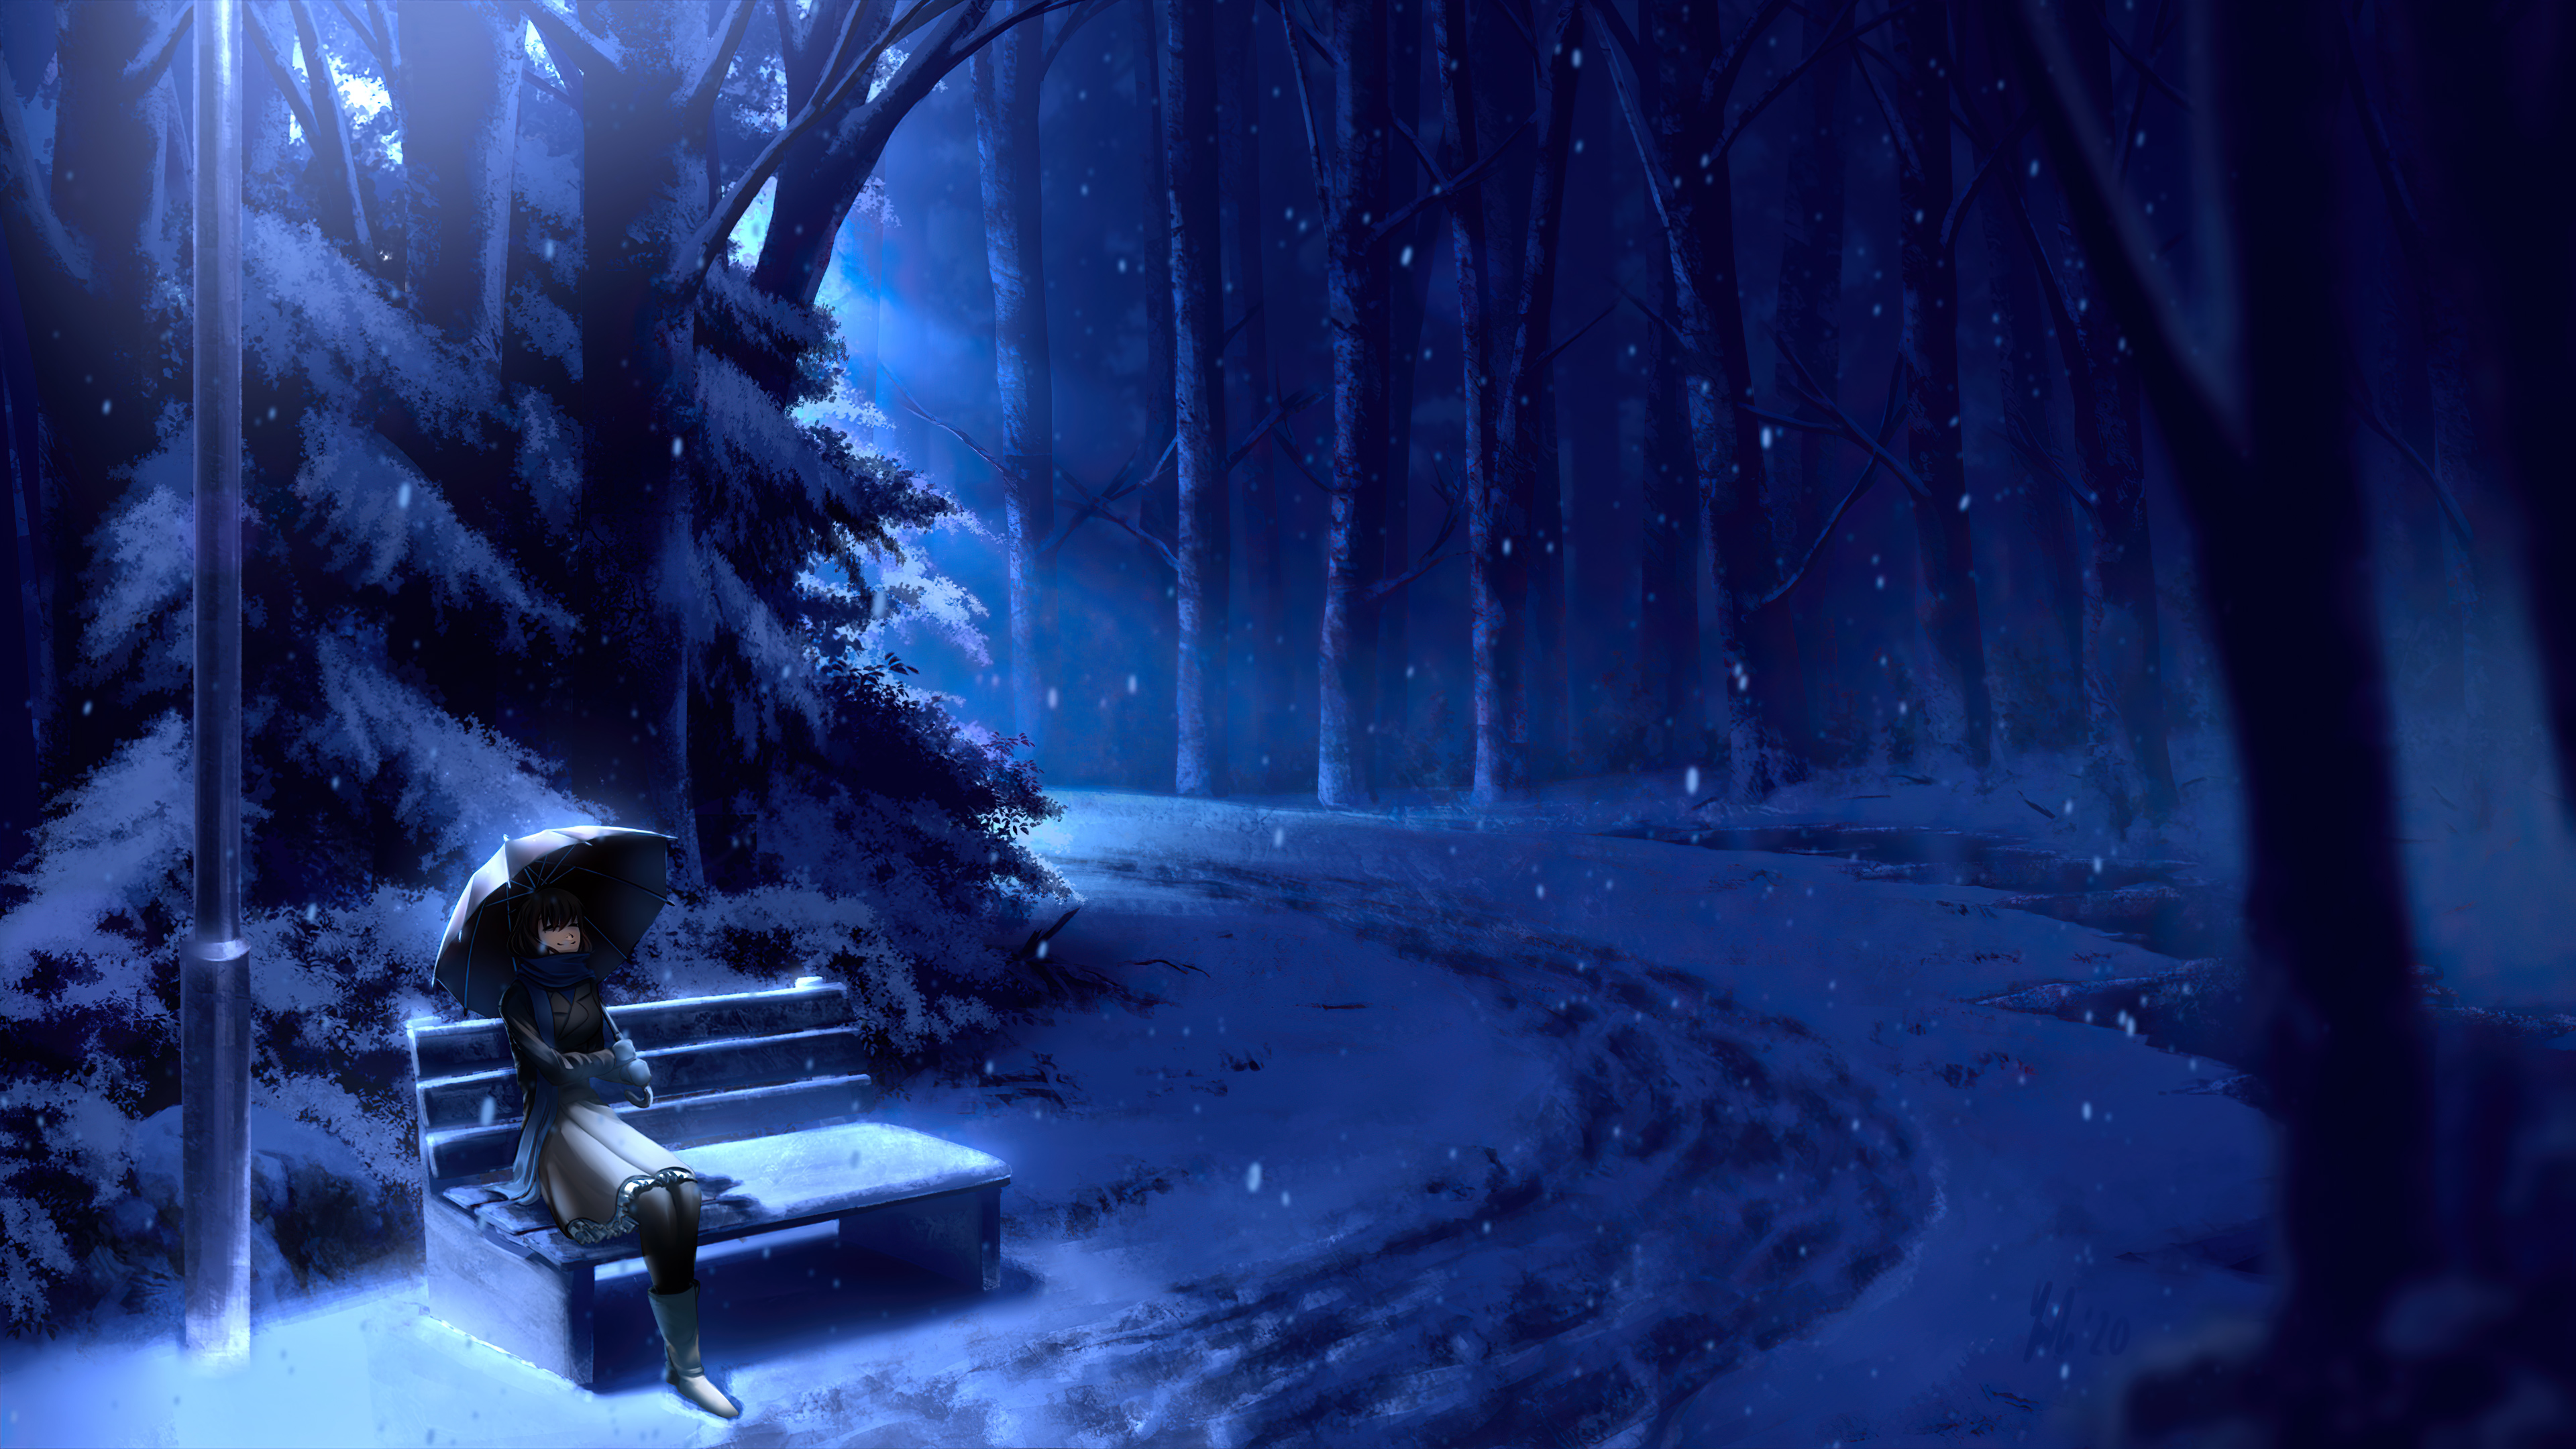 Winter night anime forest wallpapers